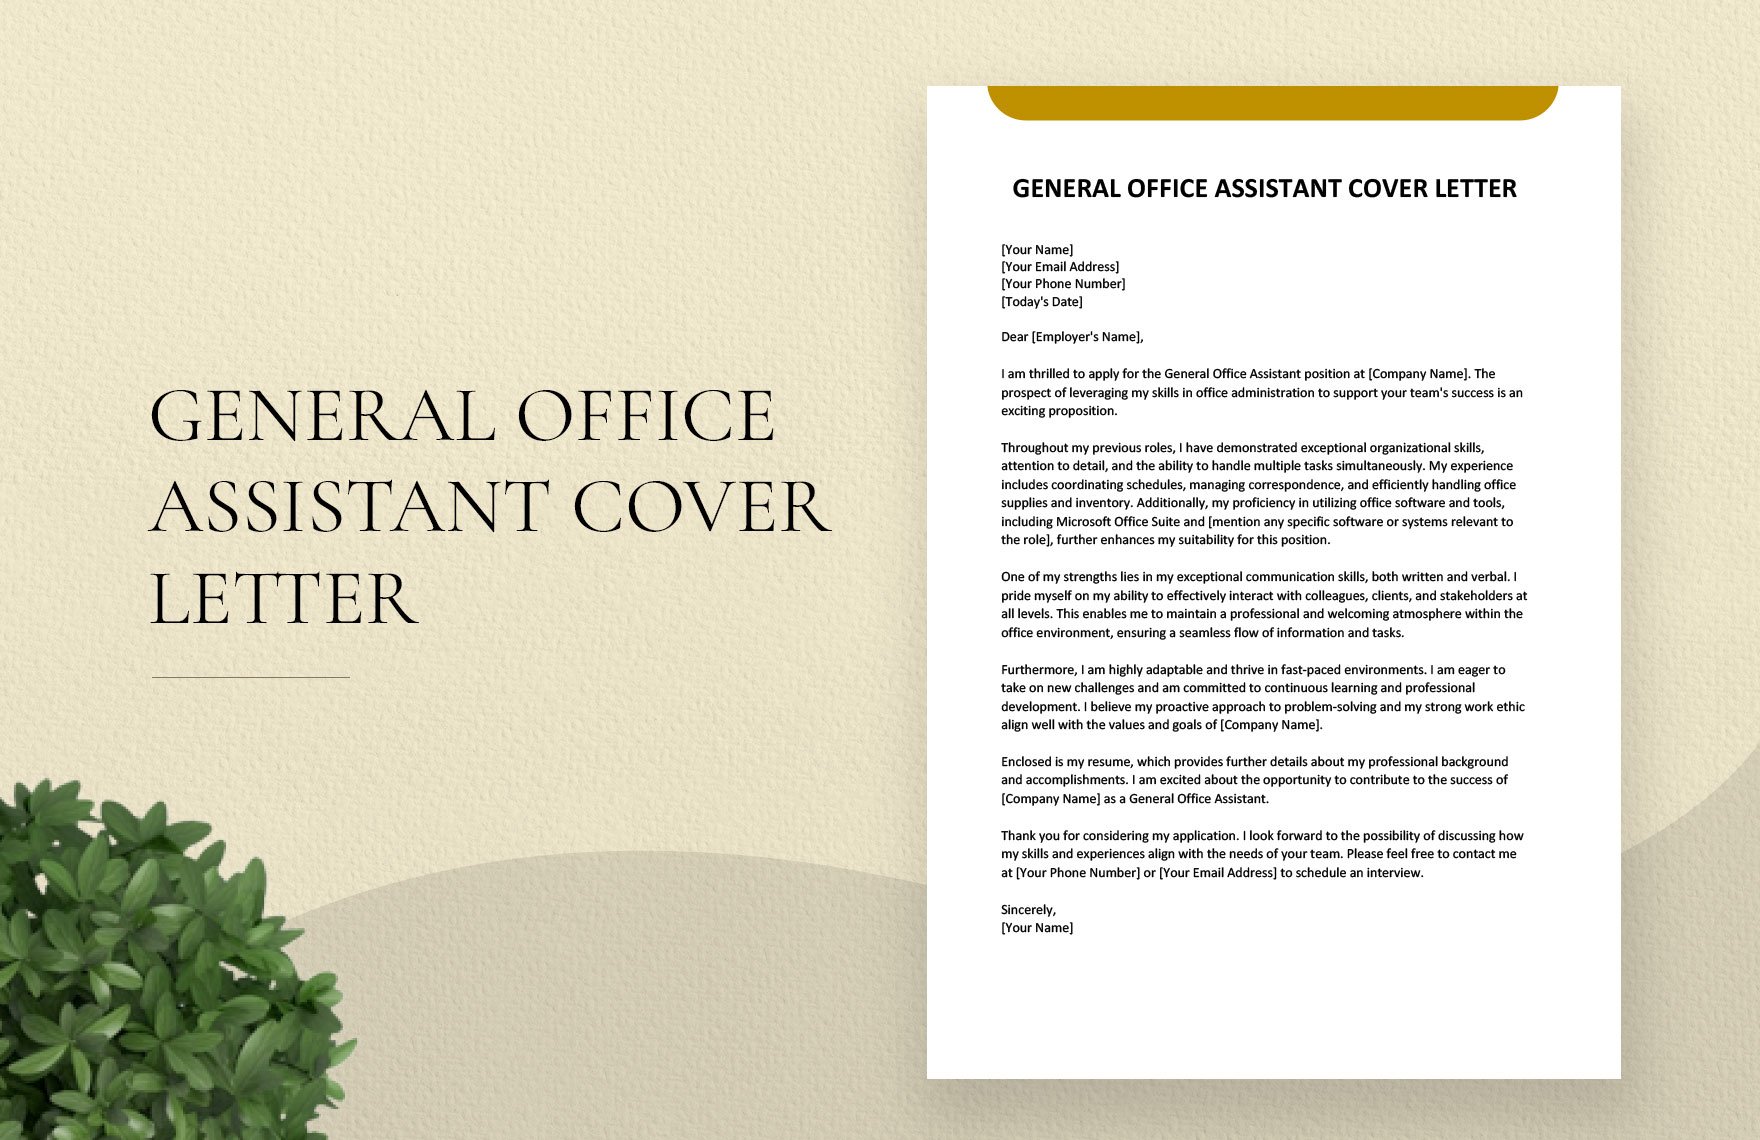 General Office Assistant Cover Letter